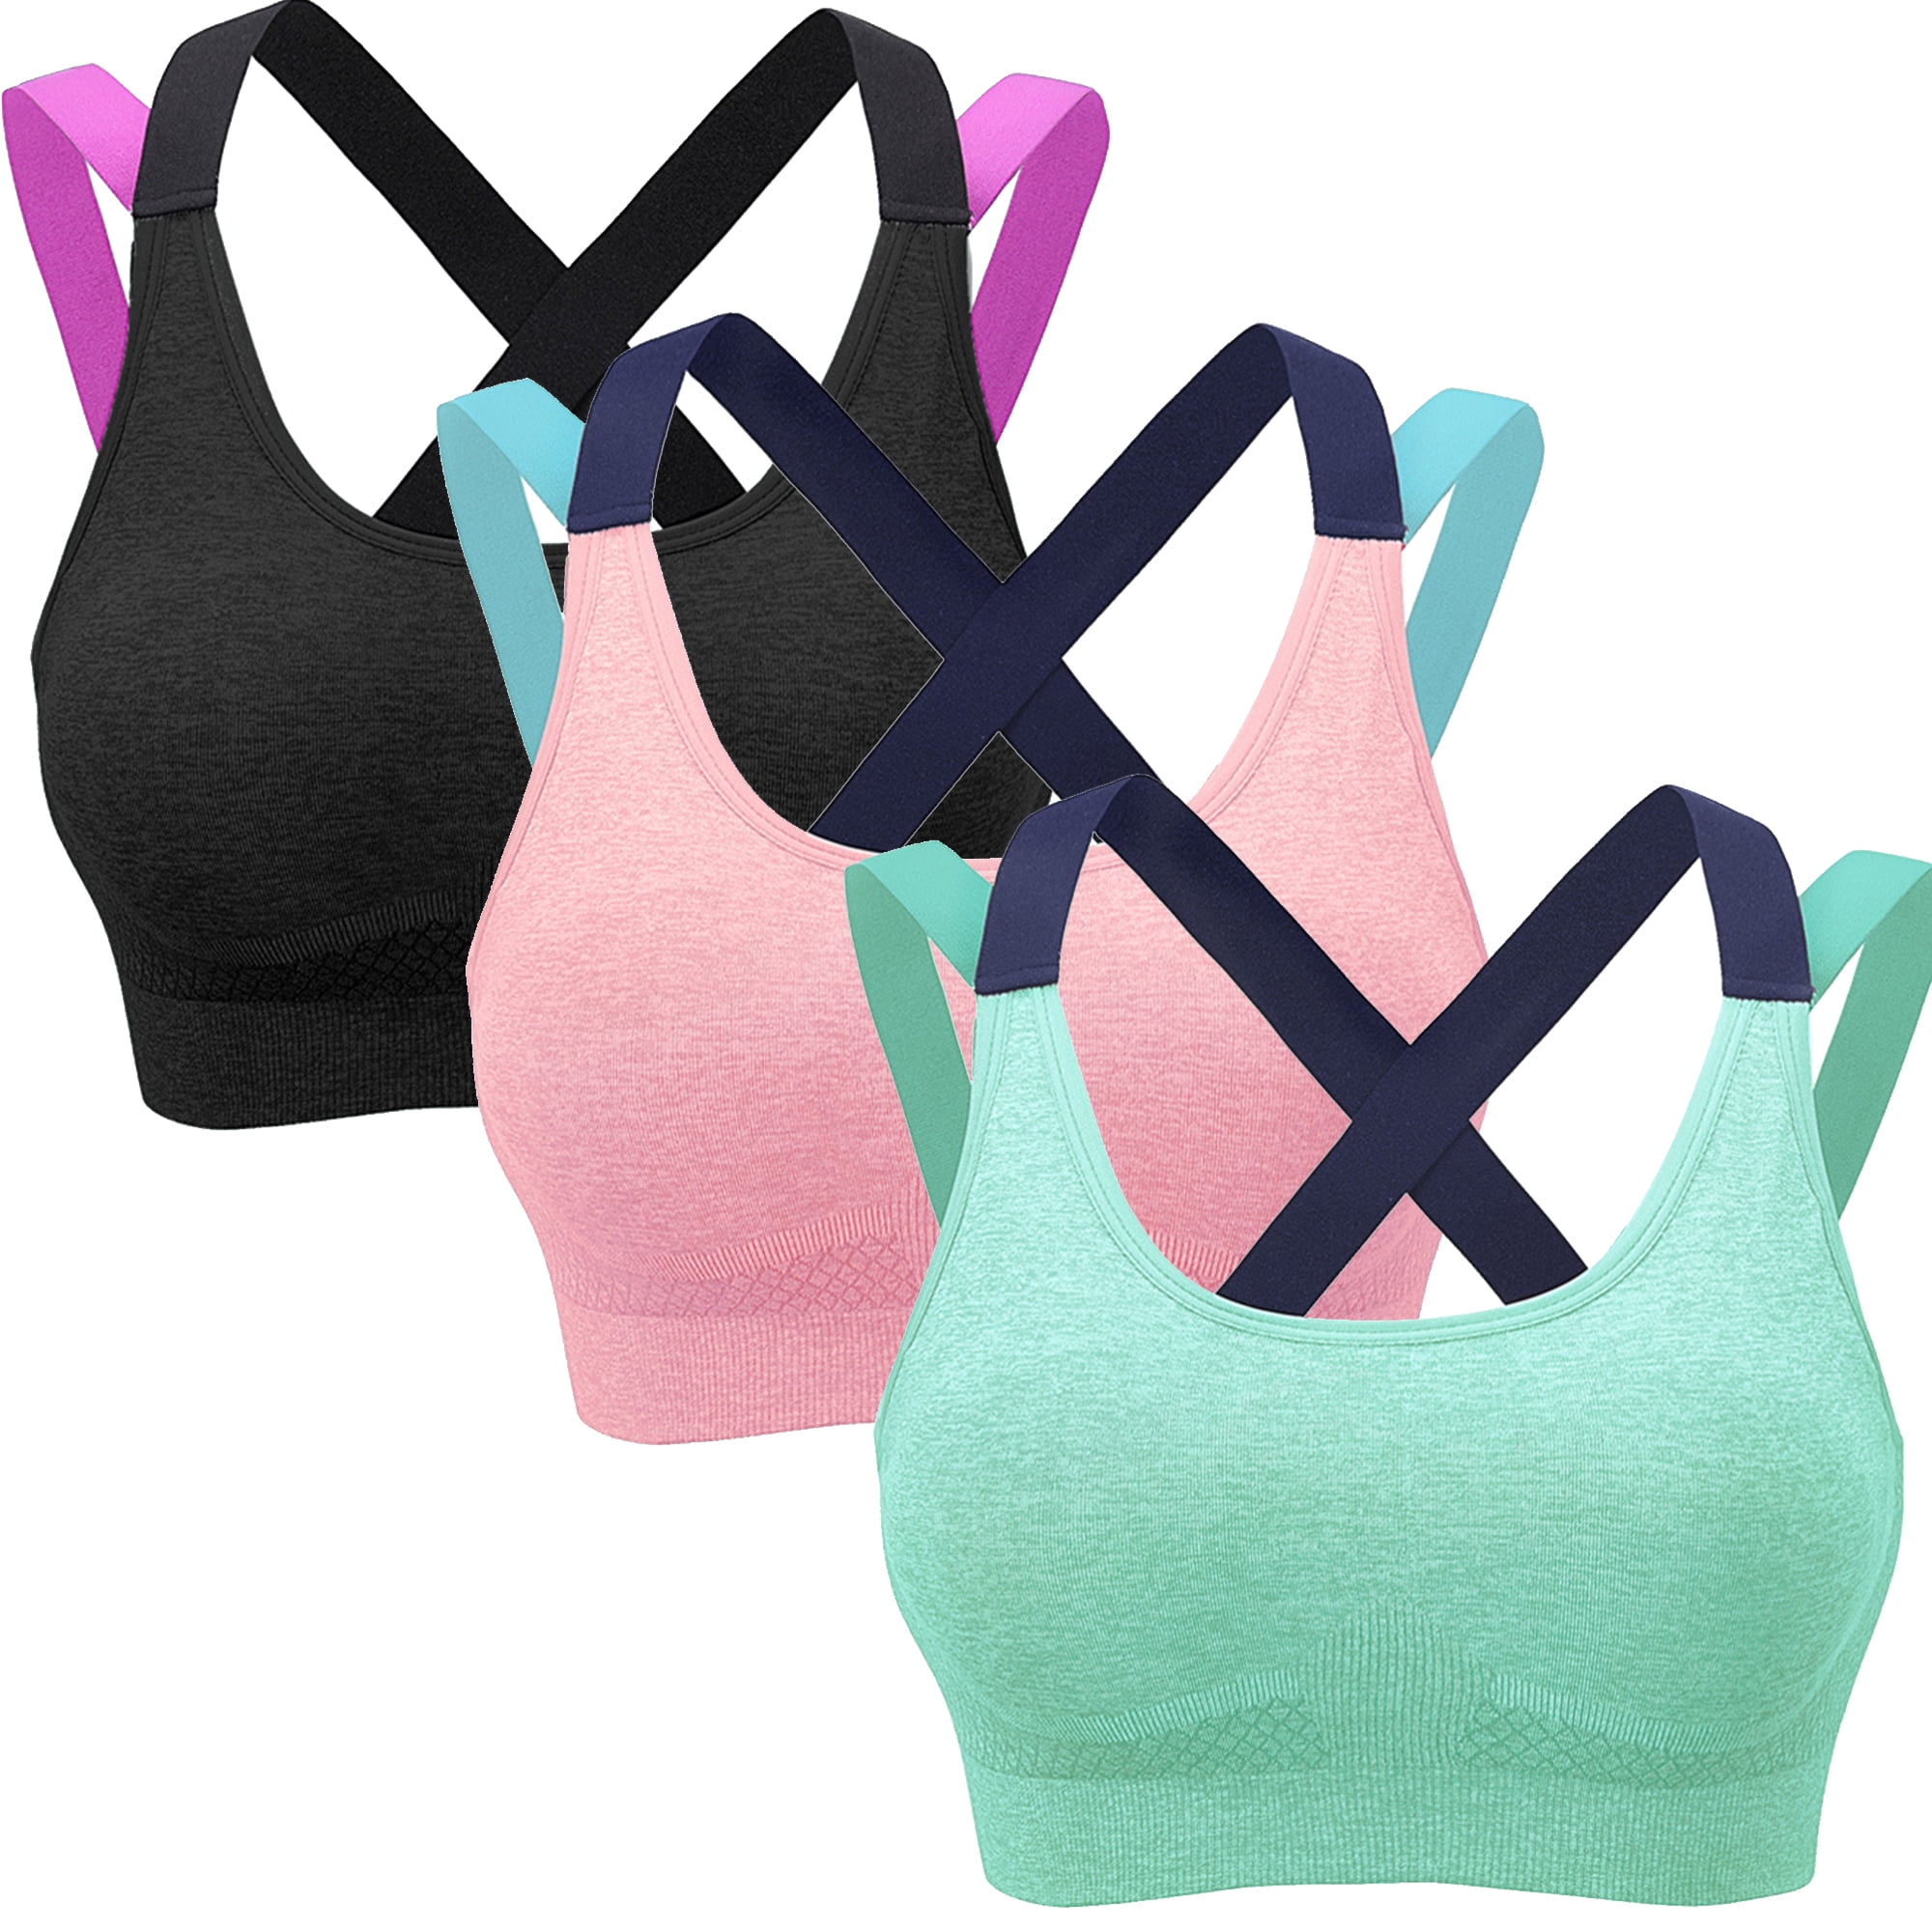 Elbourn 3 Pack Women's Medium Support Cross Back Wirefree Removable Cups  Yoga Sport Bra